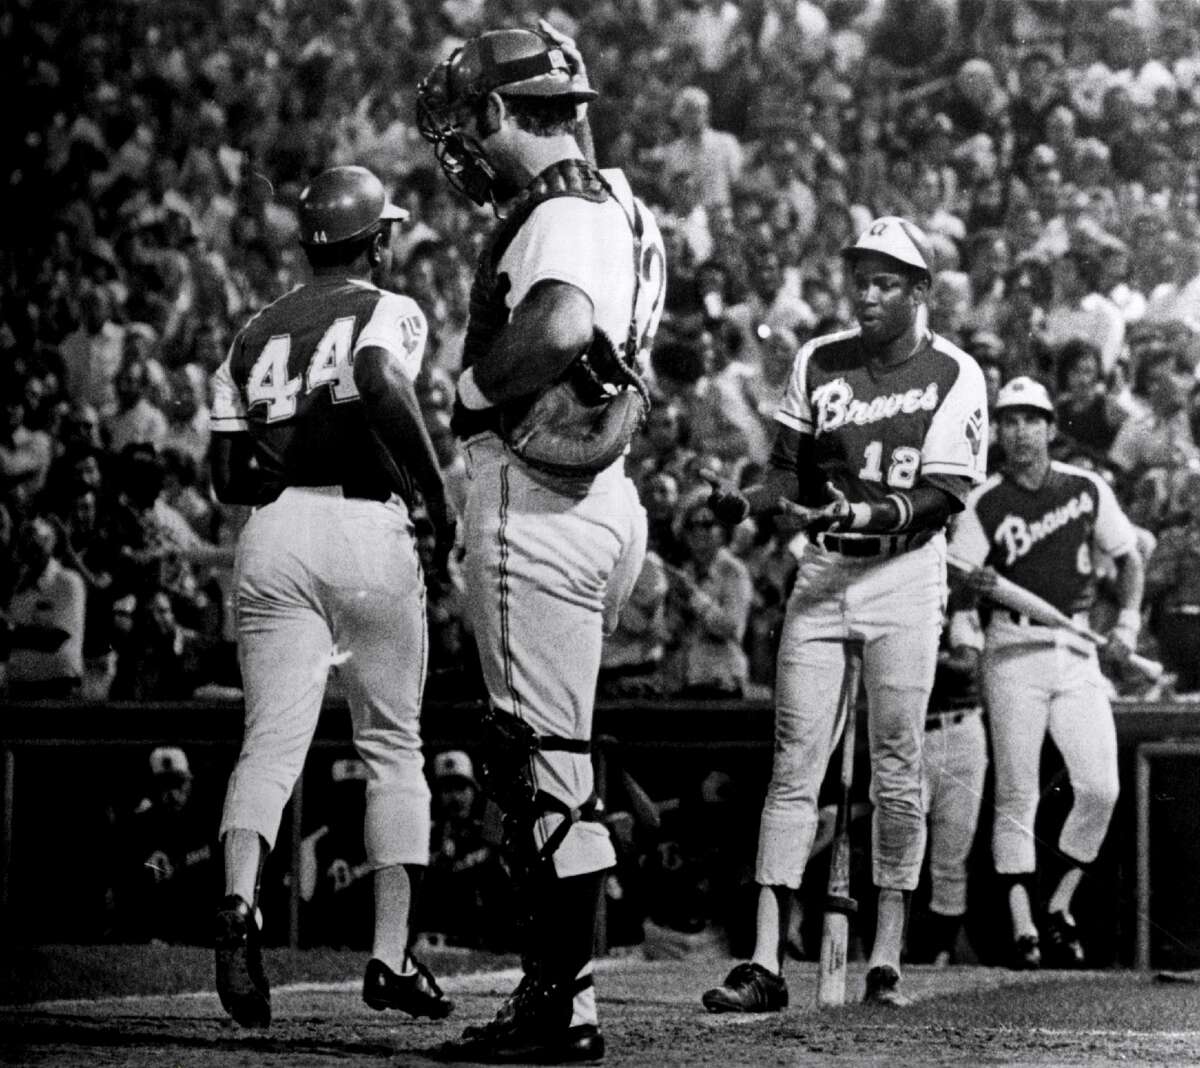 Dusty Baker of the Atlanta Braves congratulates teammate Hank Aaron after Aaron's 703rd home run on Aug. 17, 1973. (Photo by Sporting News via Getty Images via Getty Images)